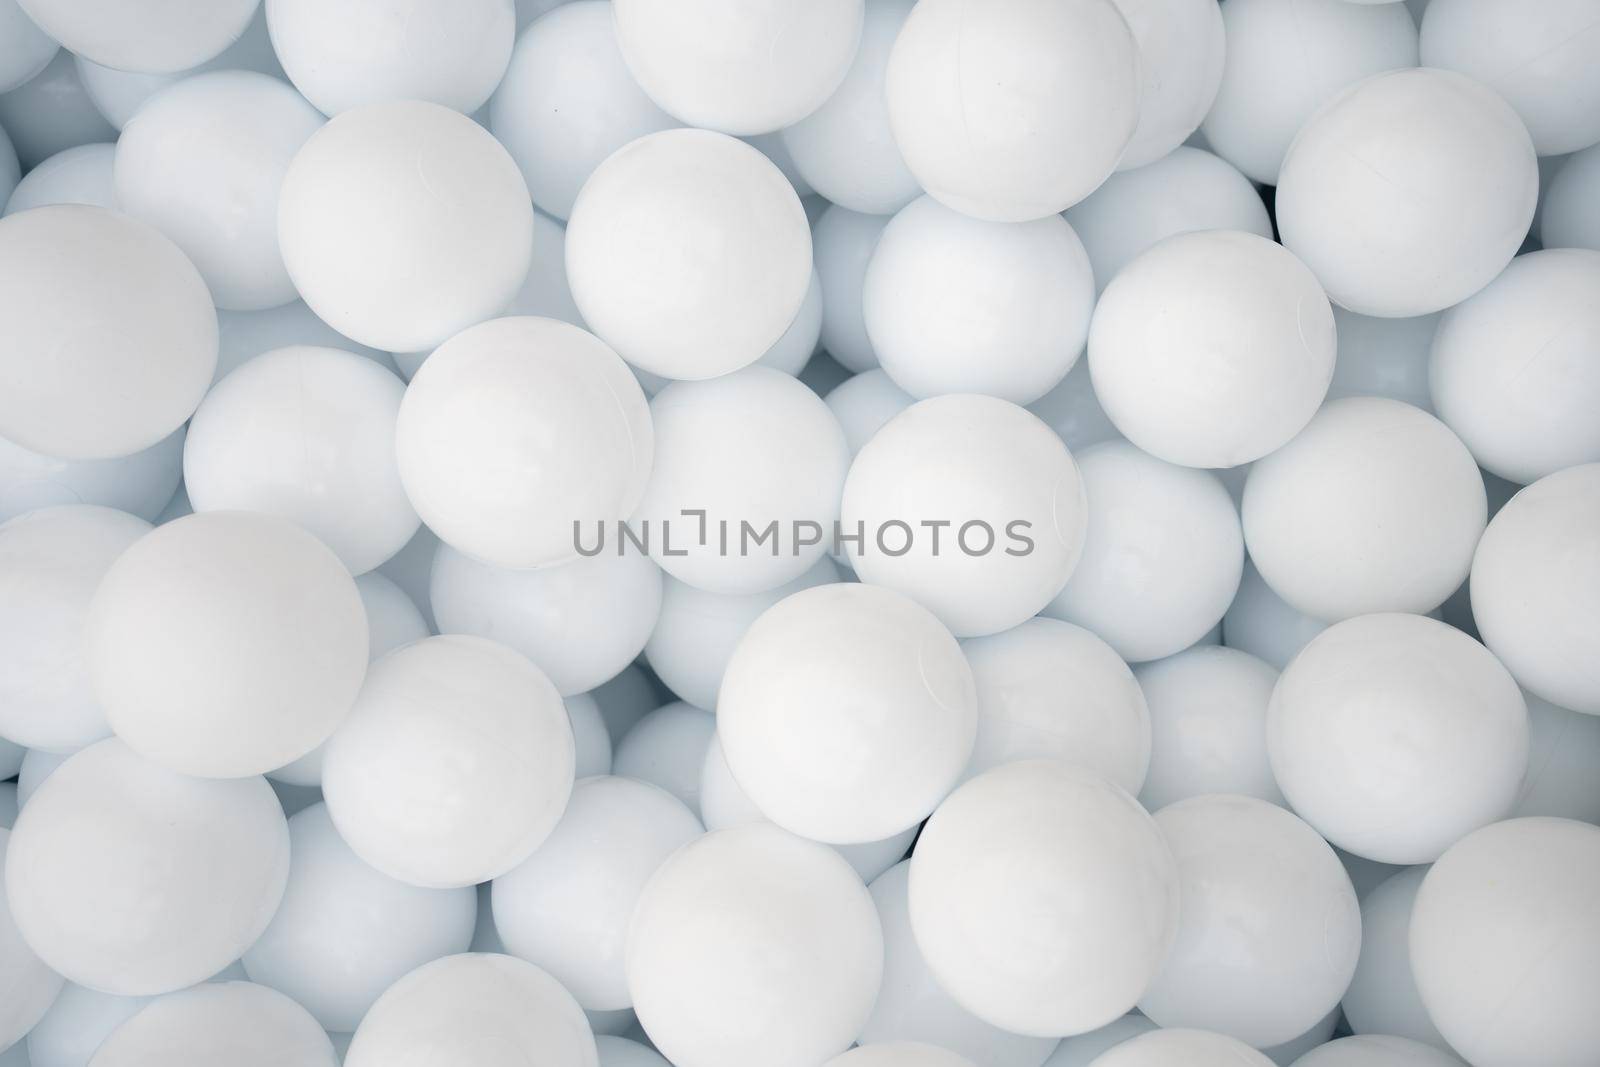 Many white plastic balls for dry pool in amusement park